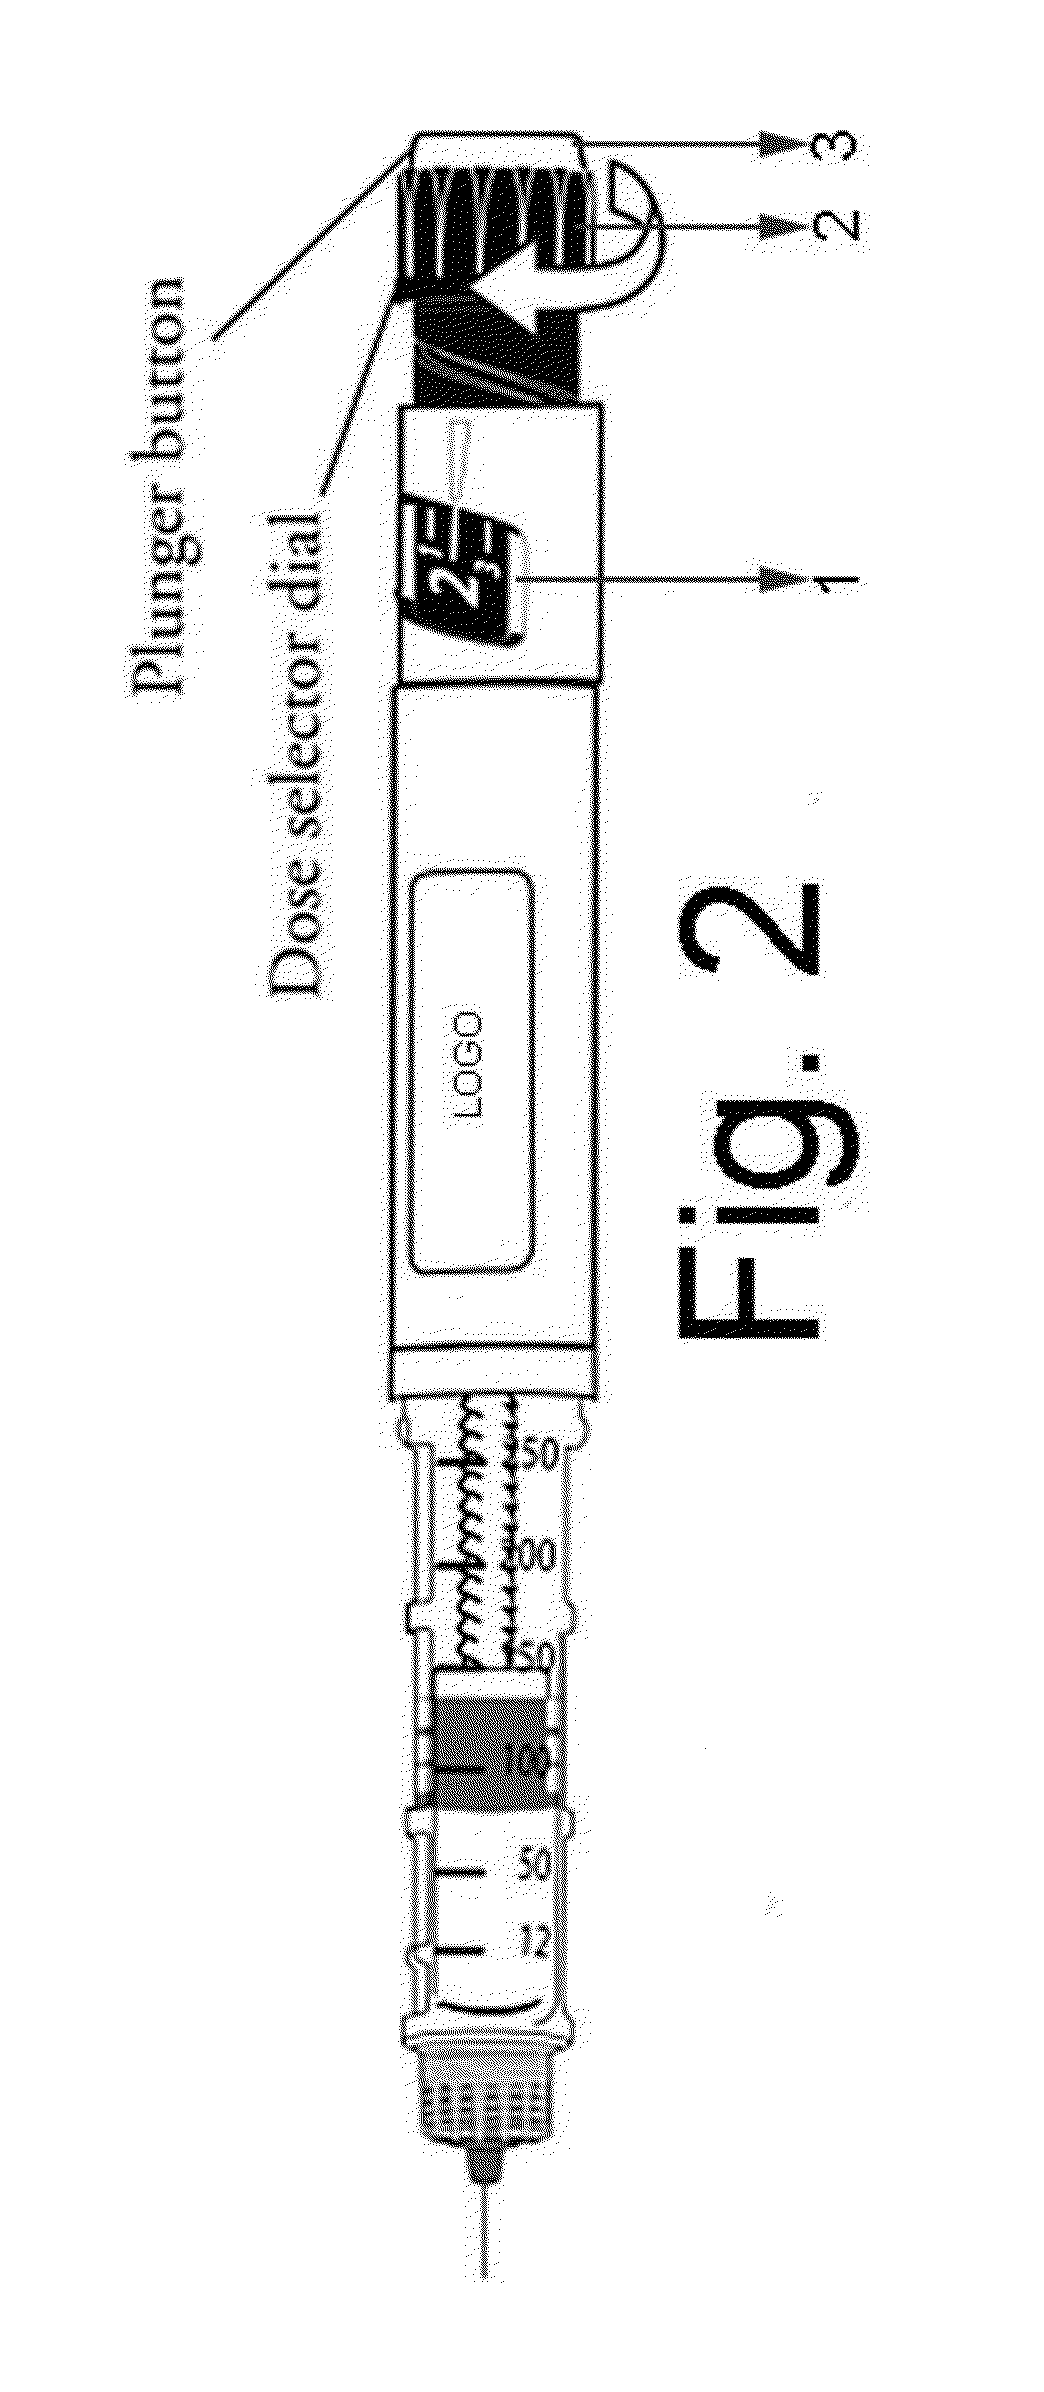 Device and method for drug dosing with administration monitoring, in particular for insulin pen integrated with smart phone apps.